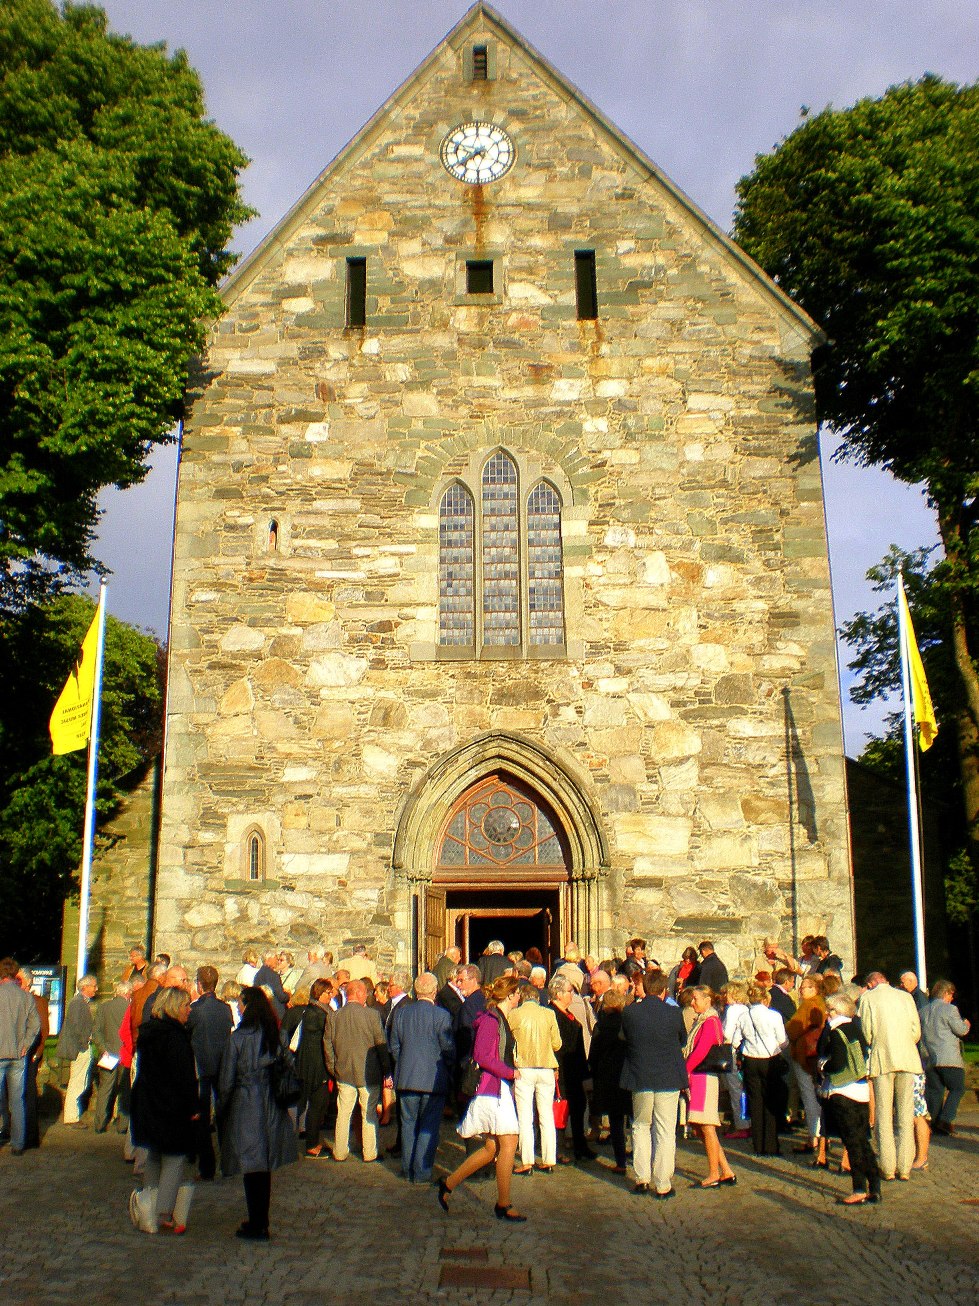 Stavanger festival crowds at the cathedral by David Nice